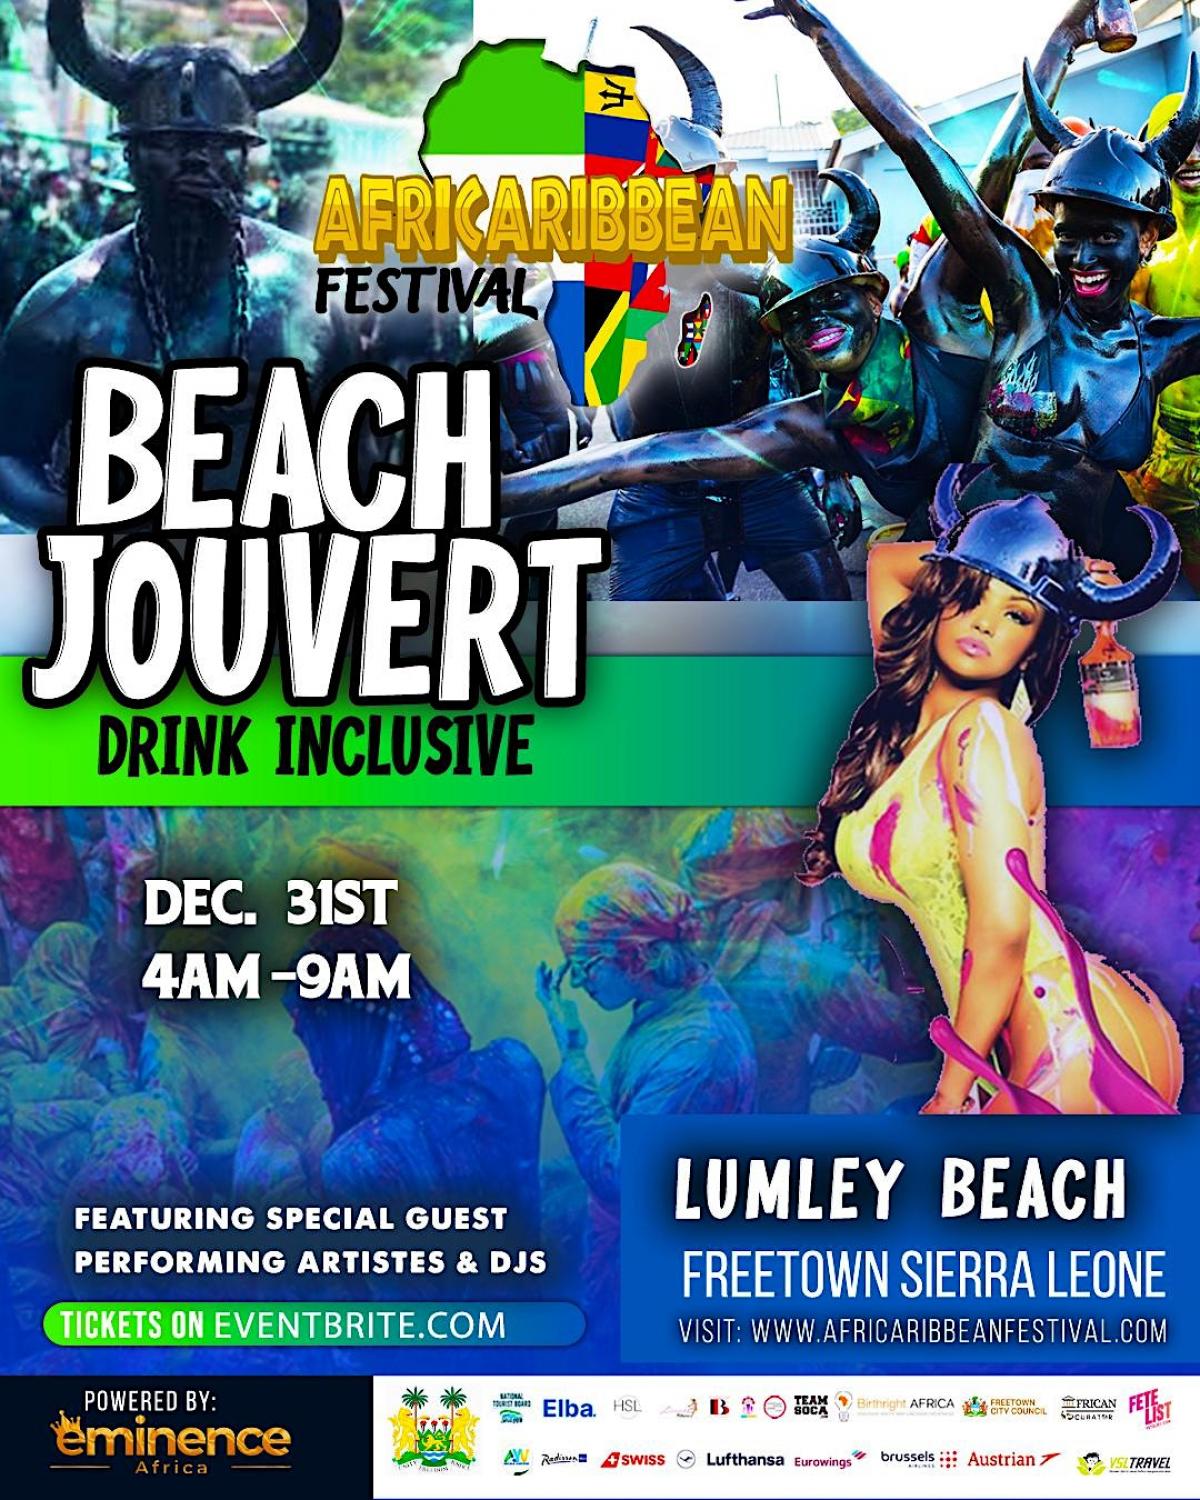 J'ouvert on the Beach flyer or graphic.